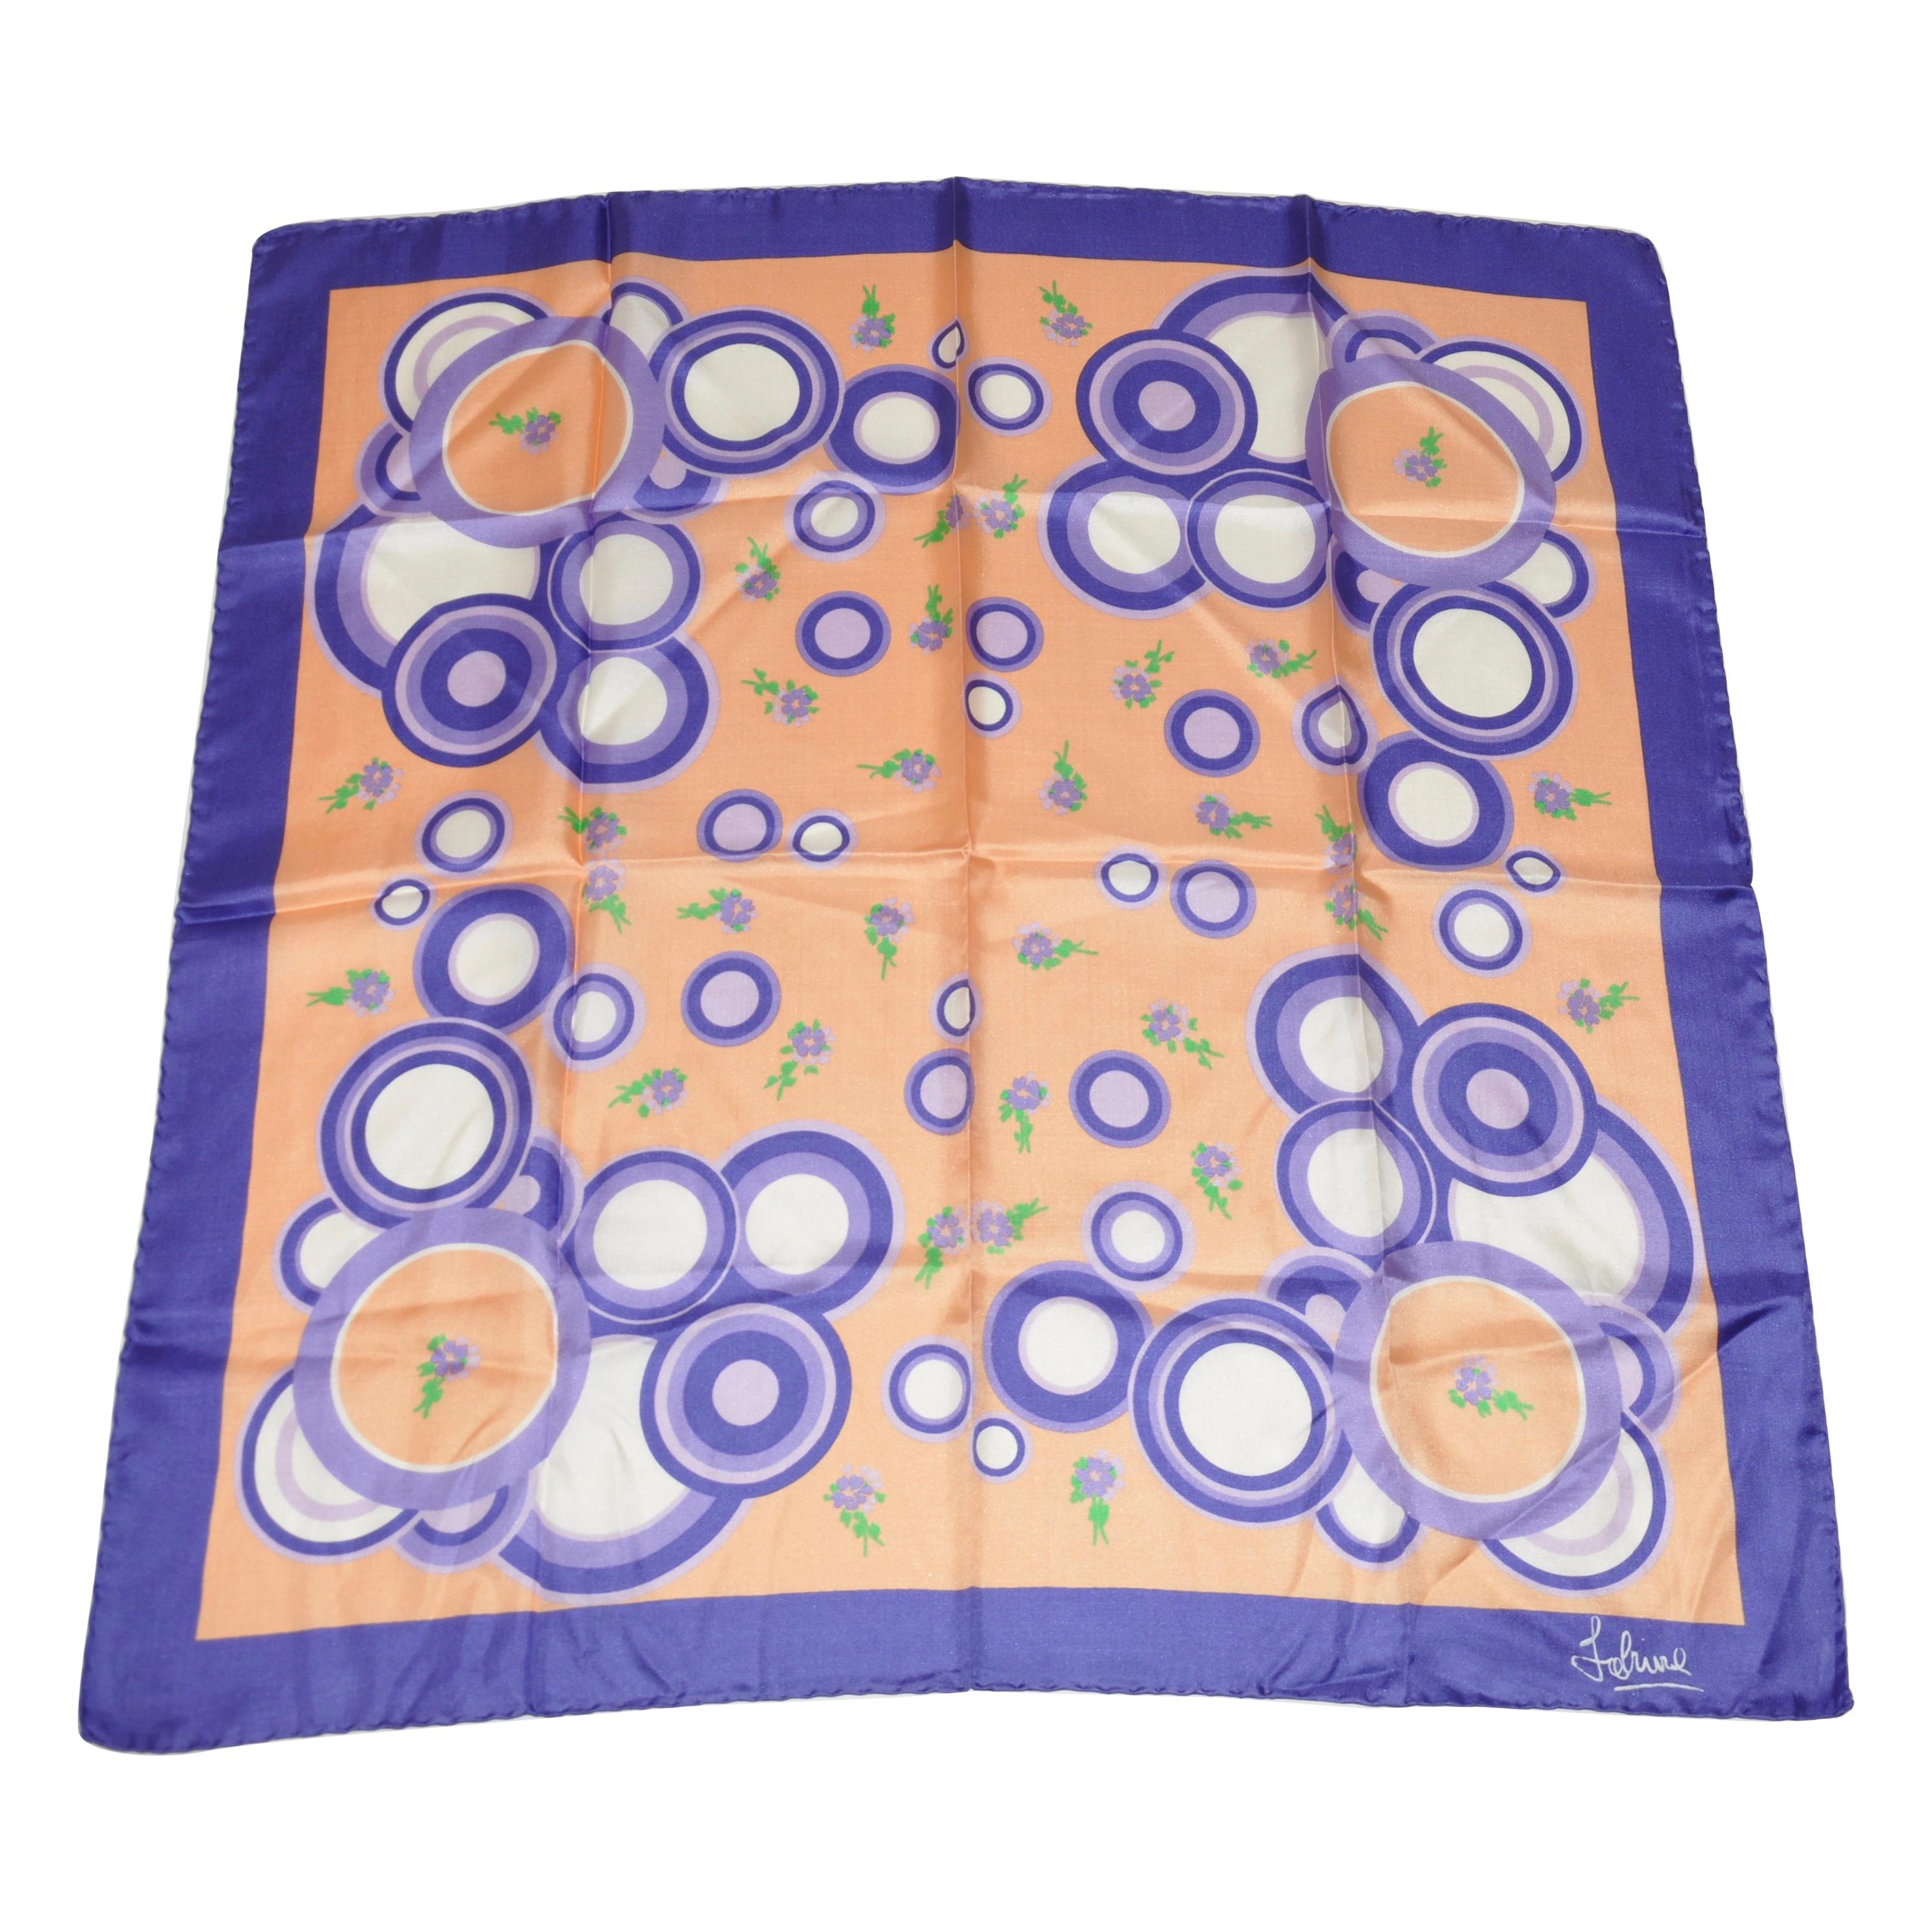 Whimsical Rich Violet with "Abstract Shades of Lavender Circles" Silk Scarf